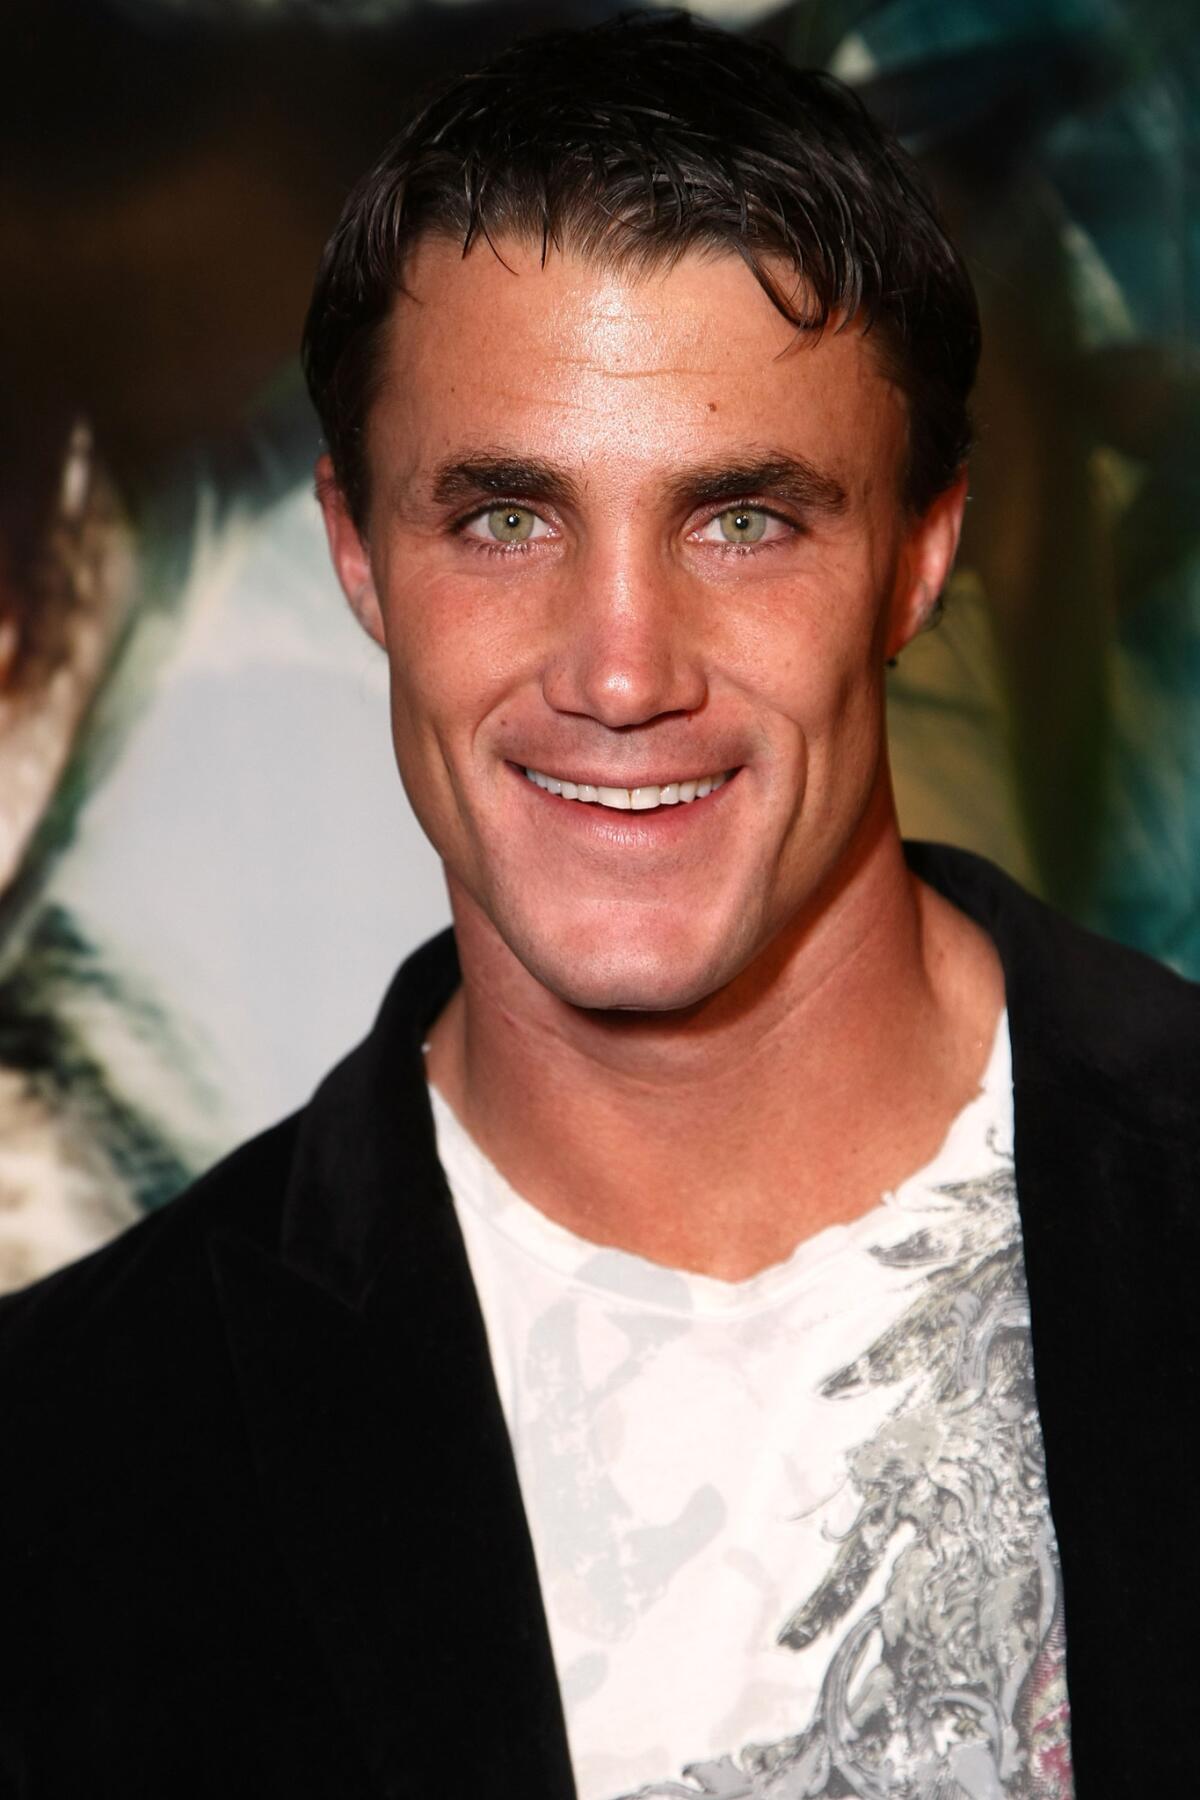 Actor, reality TV Personality and fitness trainer Greg Plitt died after being struck by a commuter train on January 17, 2015 in Burbank, Calif. He was 37 years old.